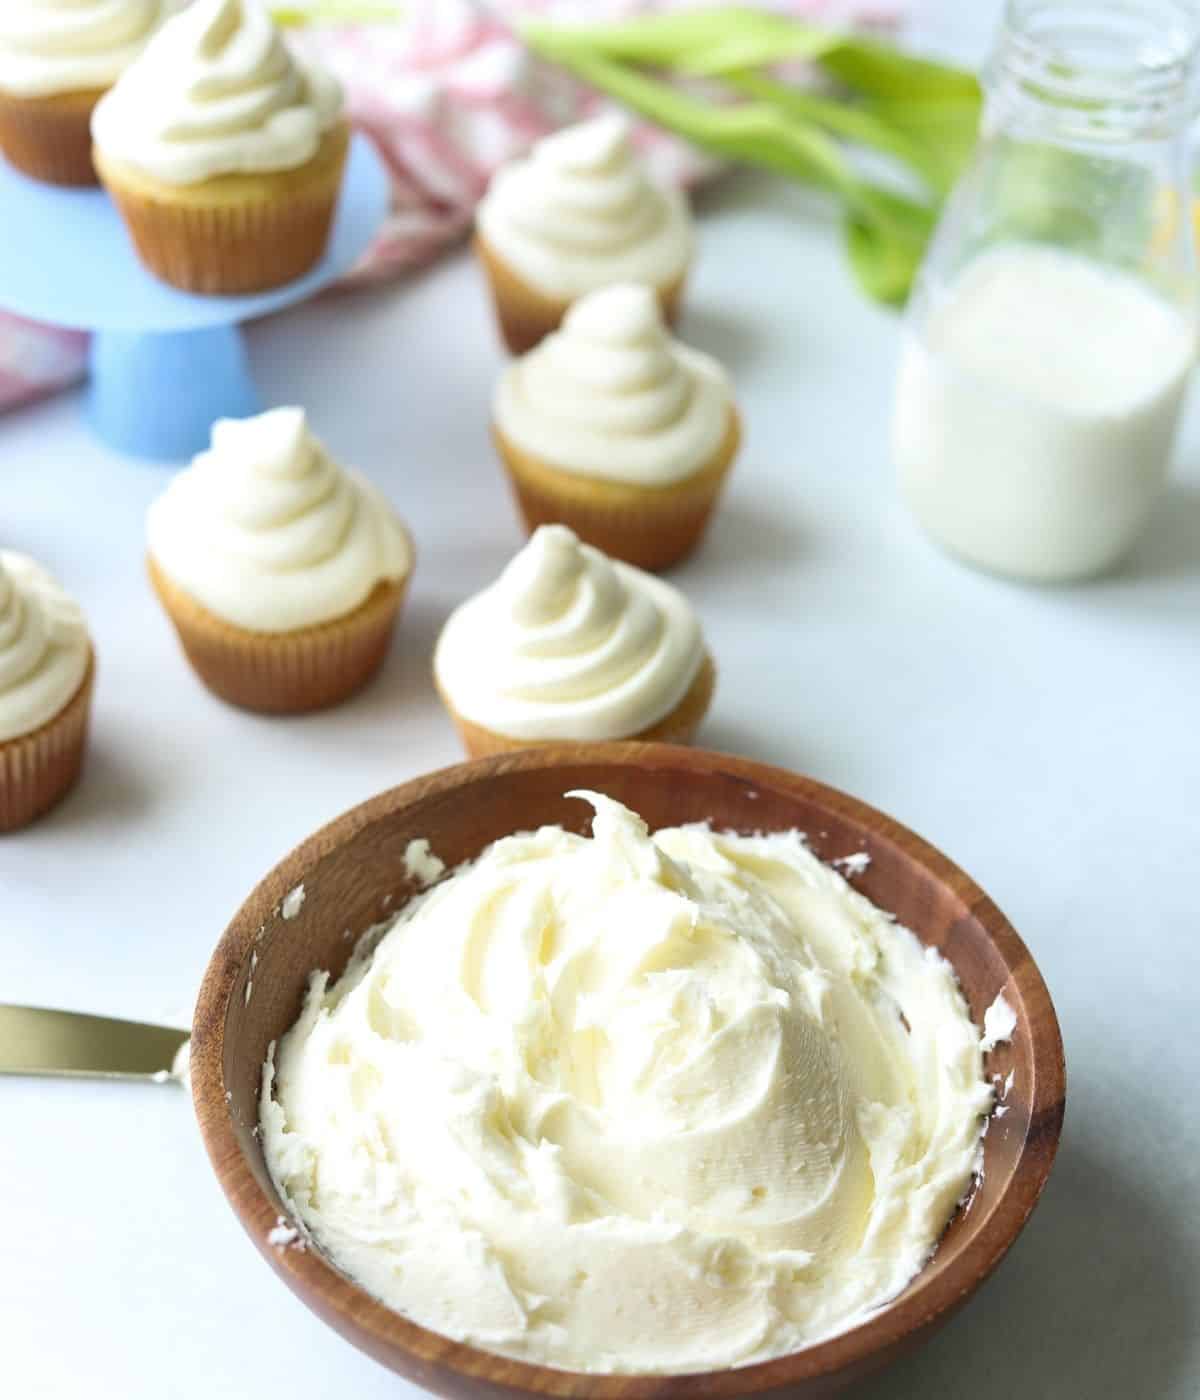 buttercream frosting in wooden bowl with cupcakes in background with milk and tulips